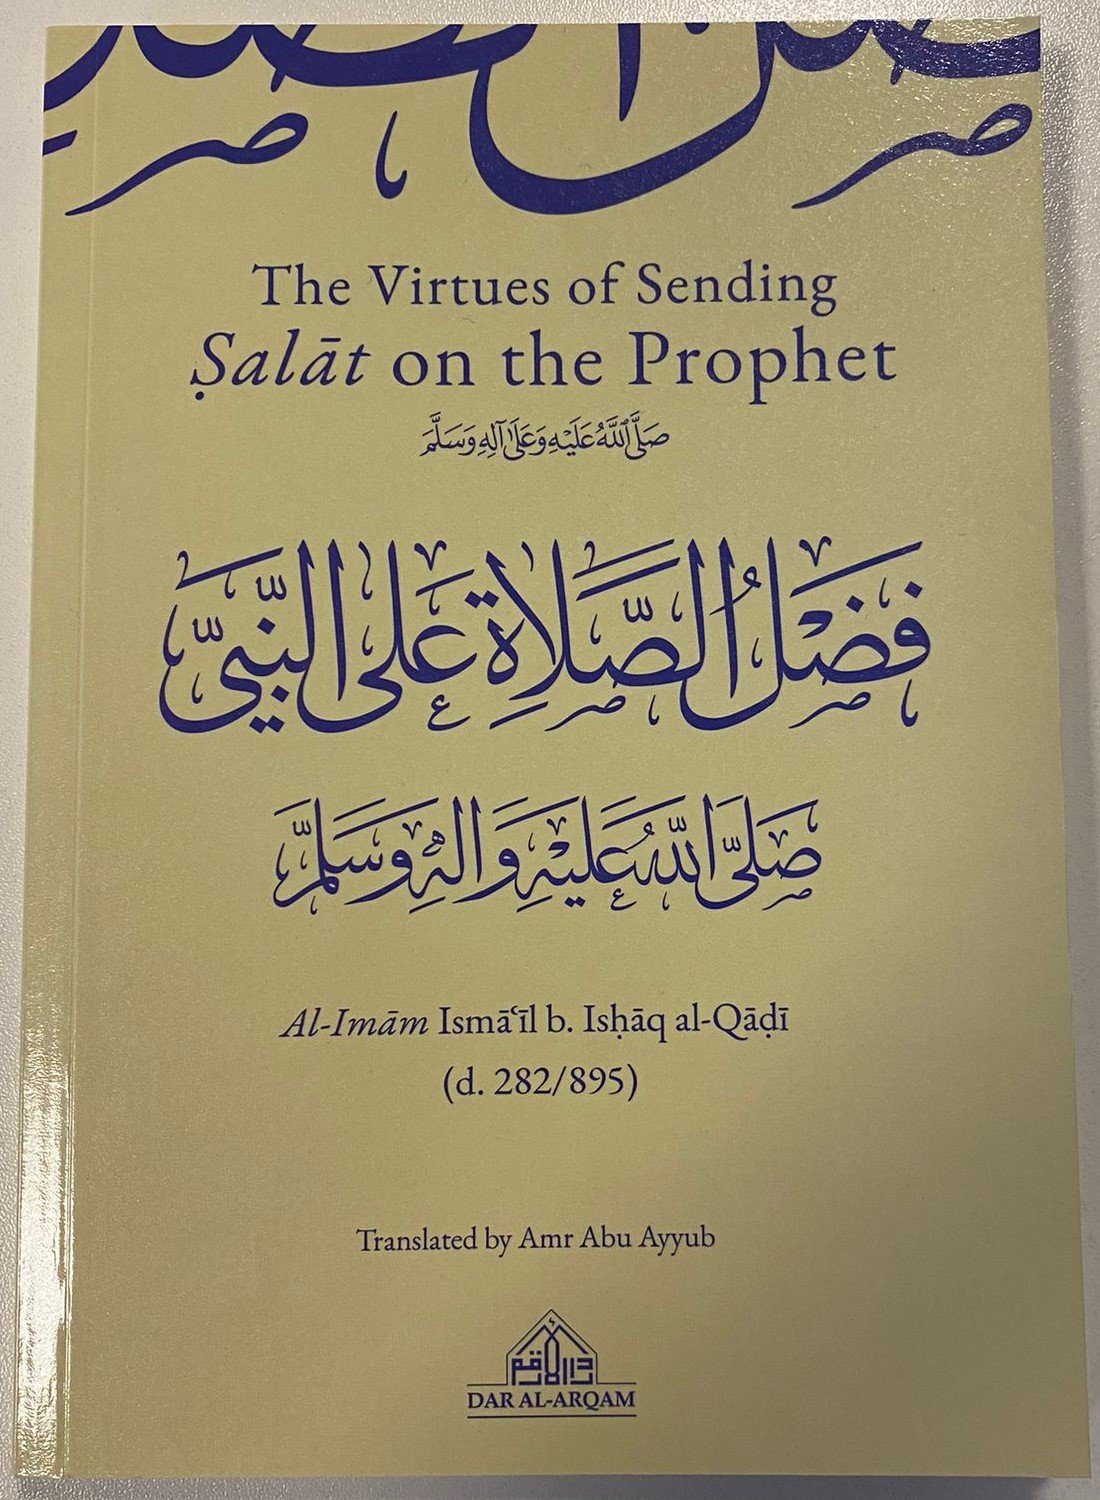 Image of The Virtues of Sending Salat on the Prophet